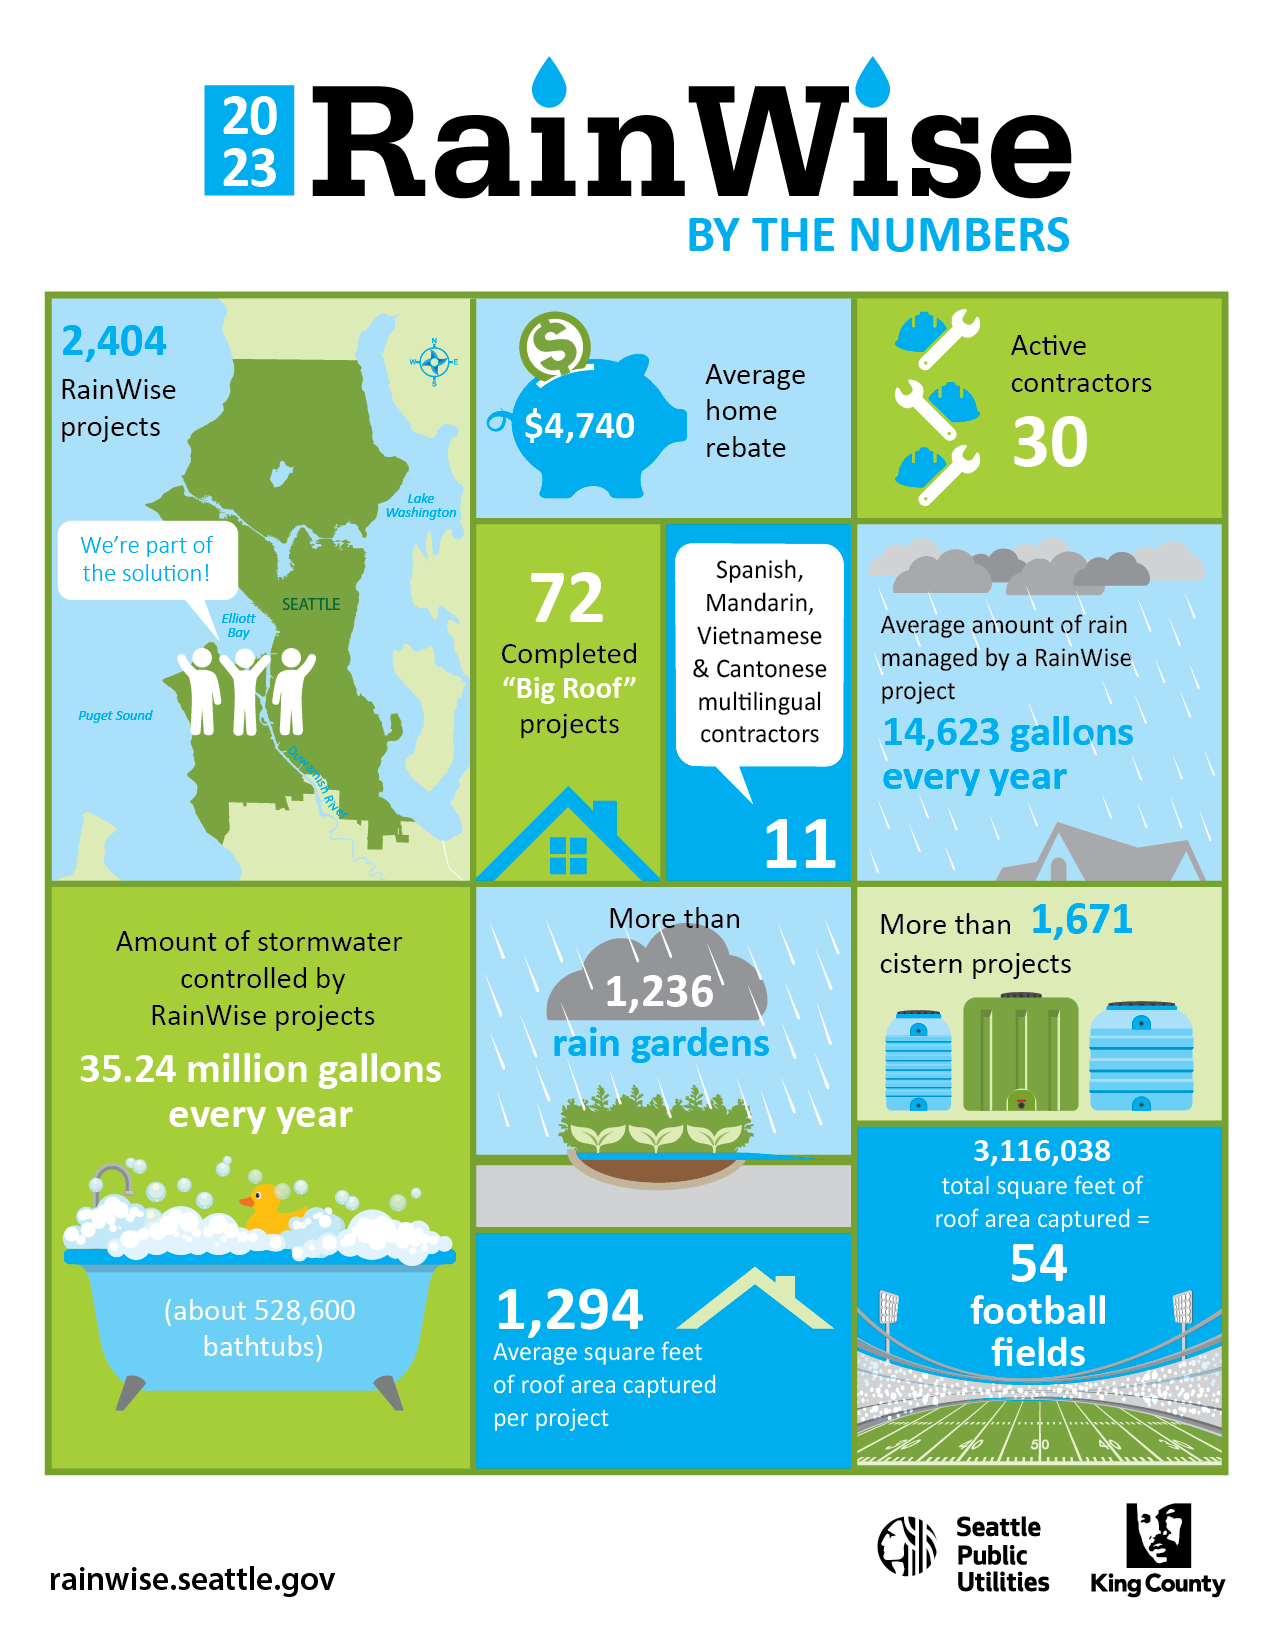 An infographic that provides statistics about the RainWise Program. The statistics state: 2,404 RainWise projects, $4,740 Average home rebate, 30 Active contractors, 72 completed Big Roof projects, 11 Spanish,  Mandarin, Vietnamese & Cantonese mullingual contractors, more than 1,294 Average square feet  of roof area captured  per project, More than 1,671 cistern projects, and 35.24 million gallons every year Amount of stormwater  controlled by RainWise projects